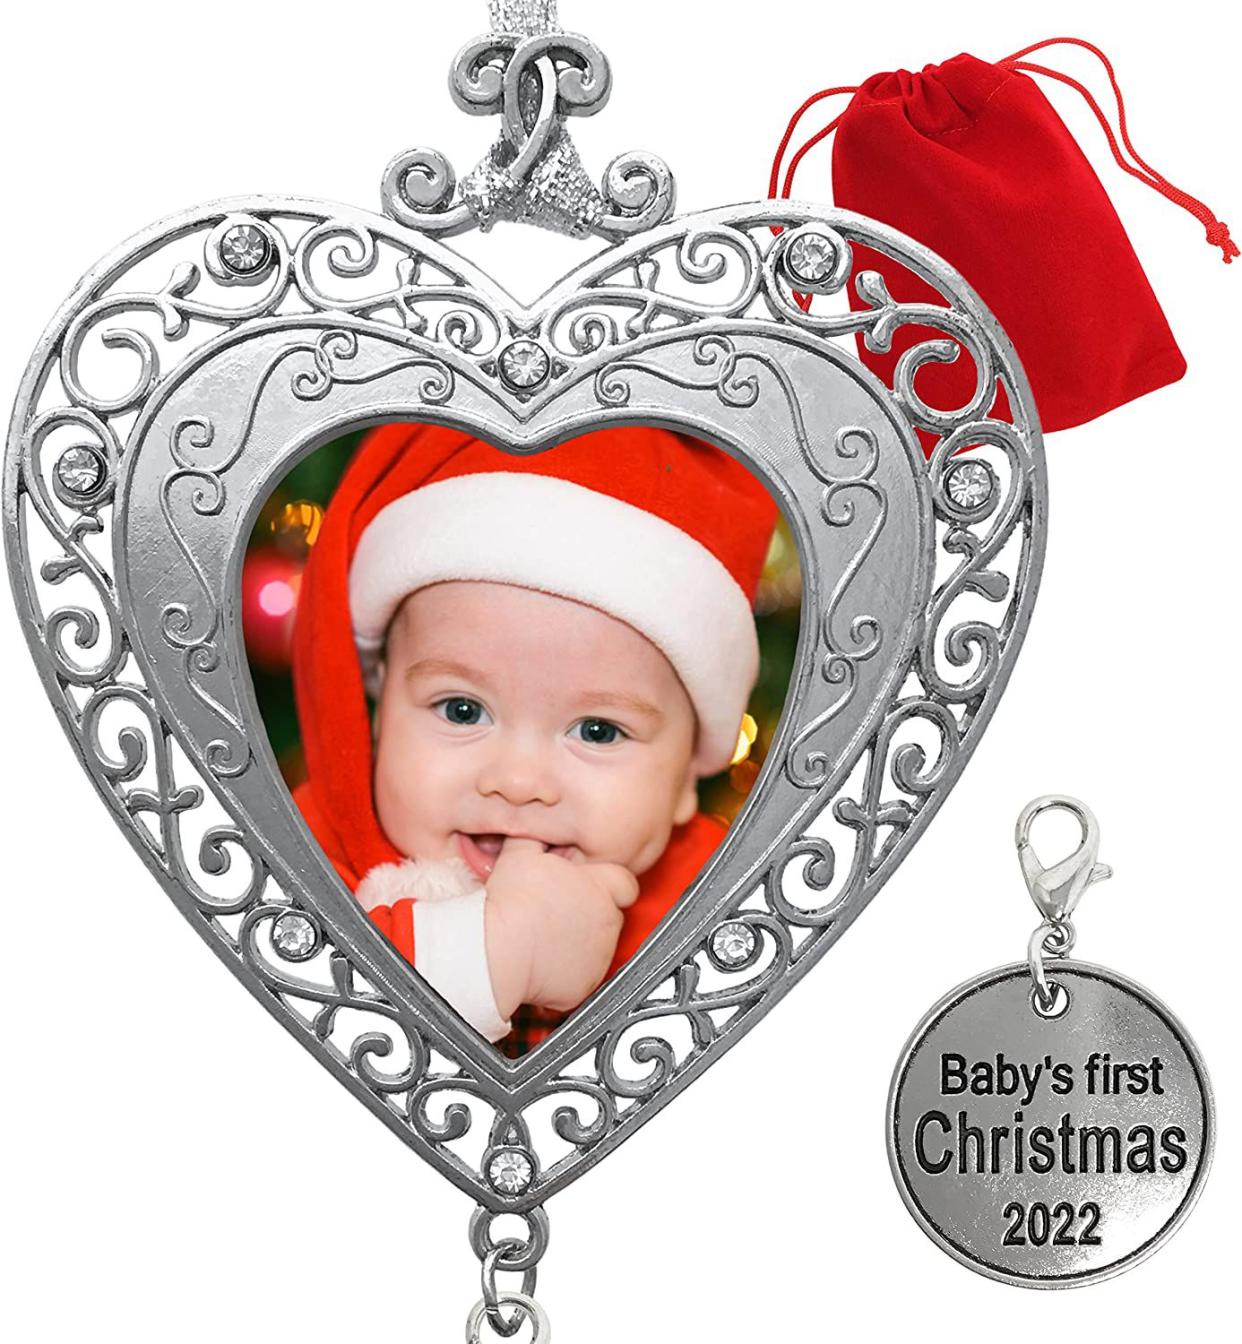 Banberry Designs Baby’s First Christmas Picture Ornament